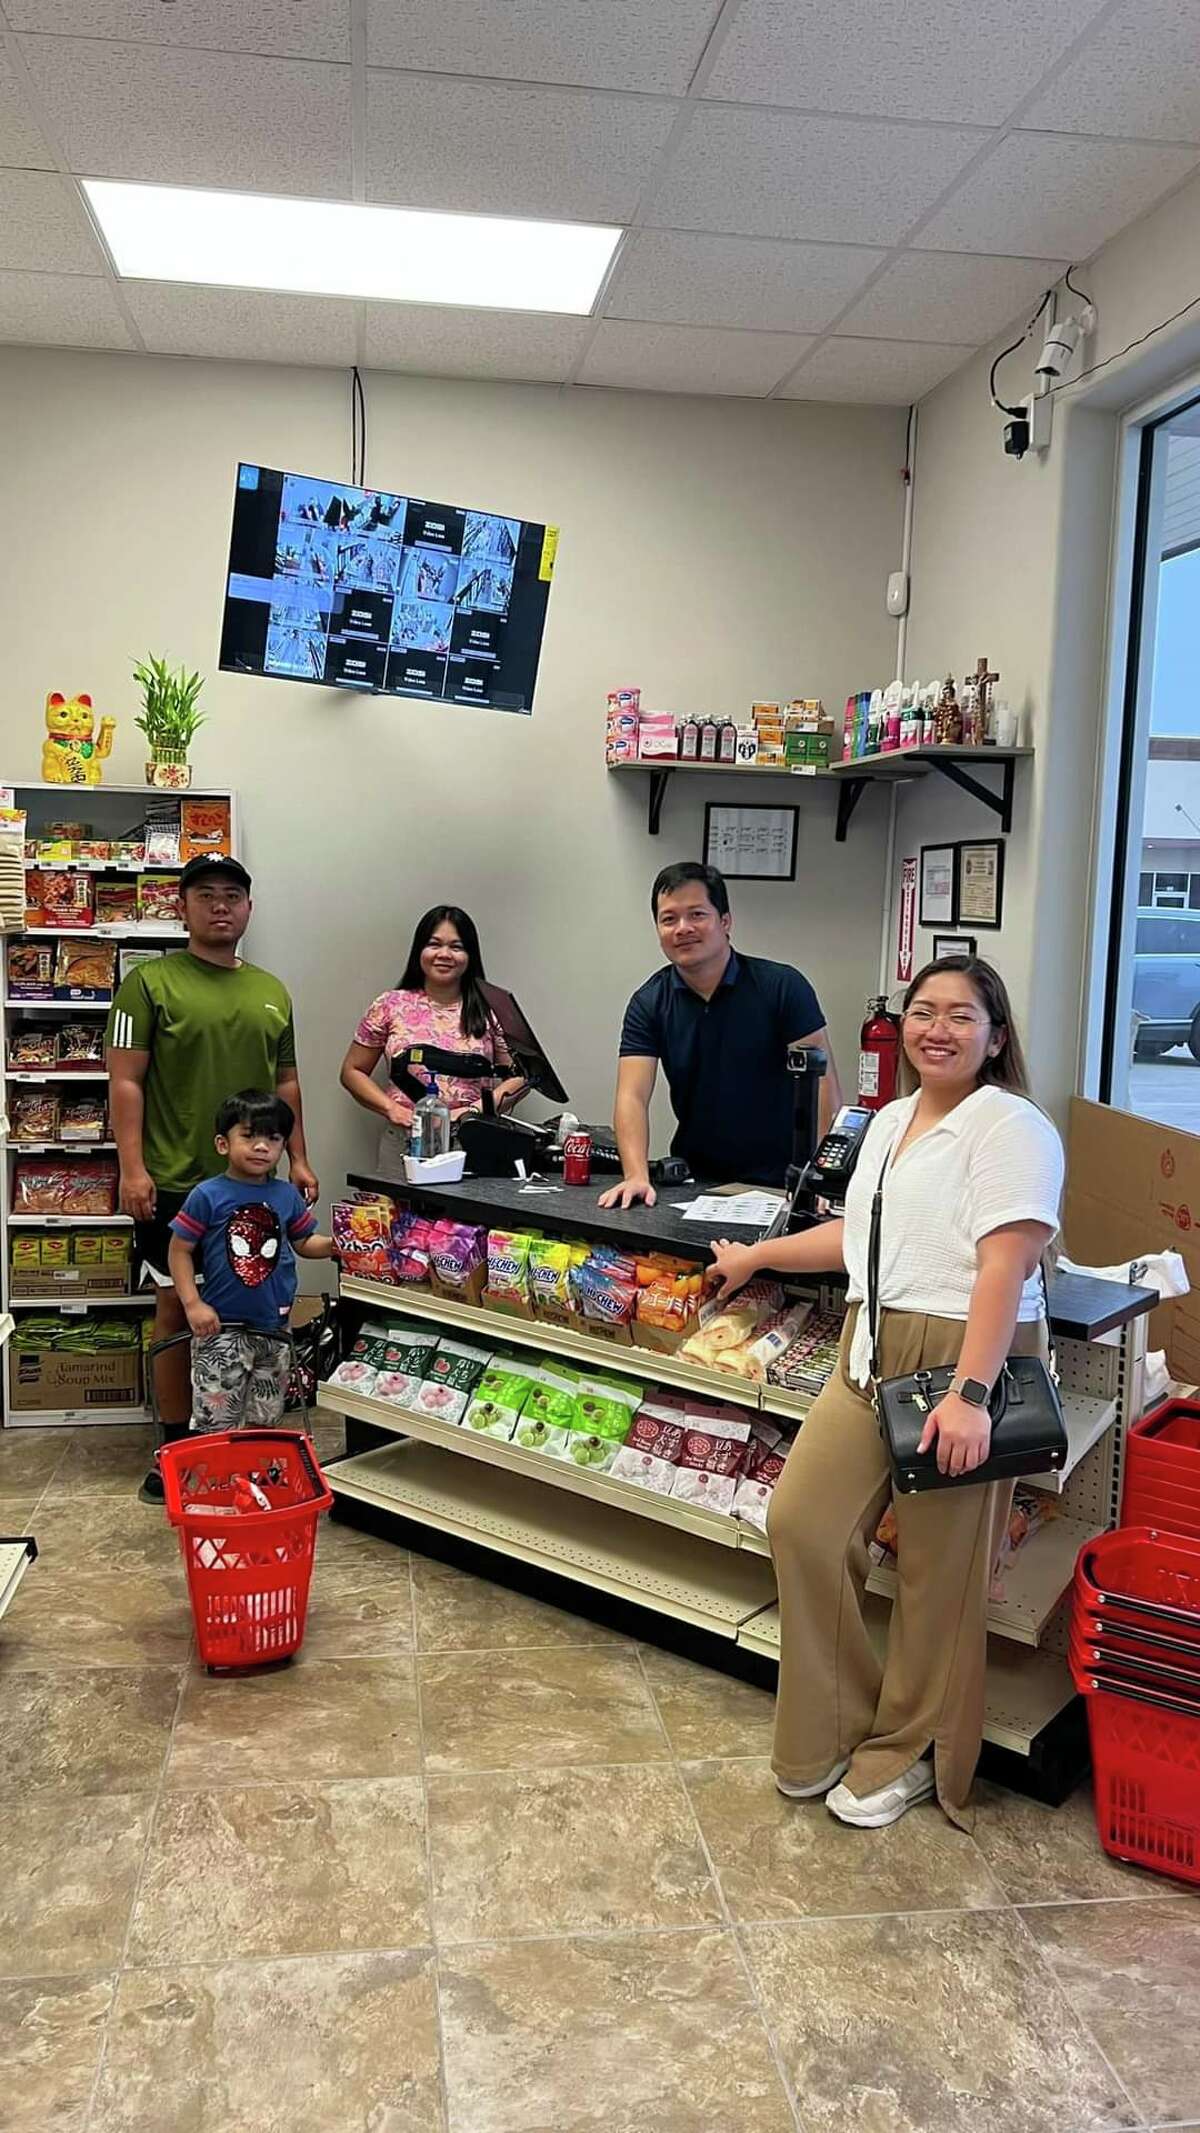 The South Texas Oriental Market opened in Laredo on Sunday, May 7, 2023. It offers a variety of Asian food items and products.